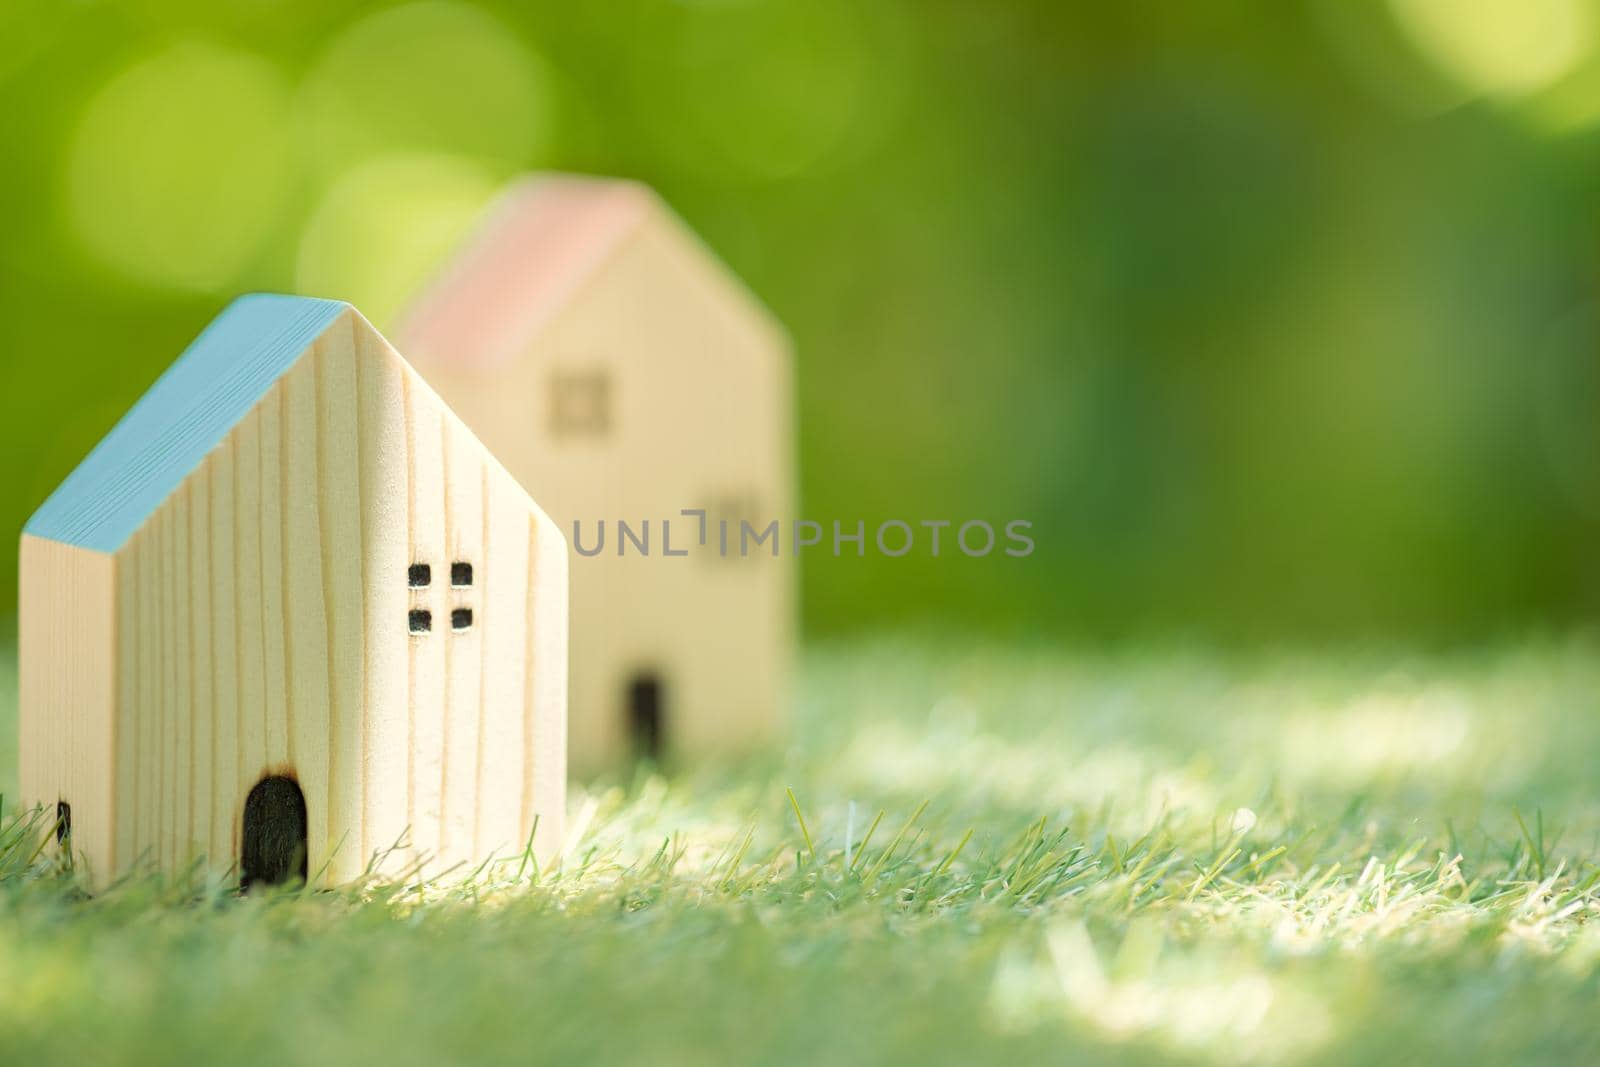 Small wooden home in green nature background for eco house village community postcard banner image.